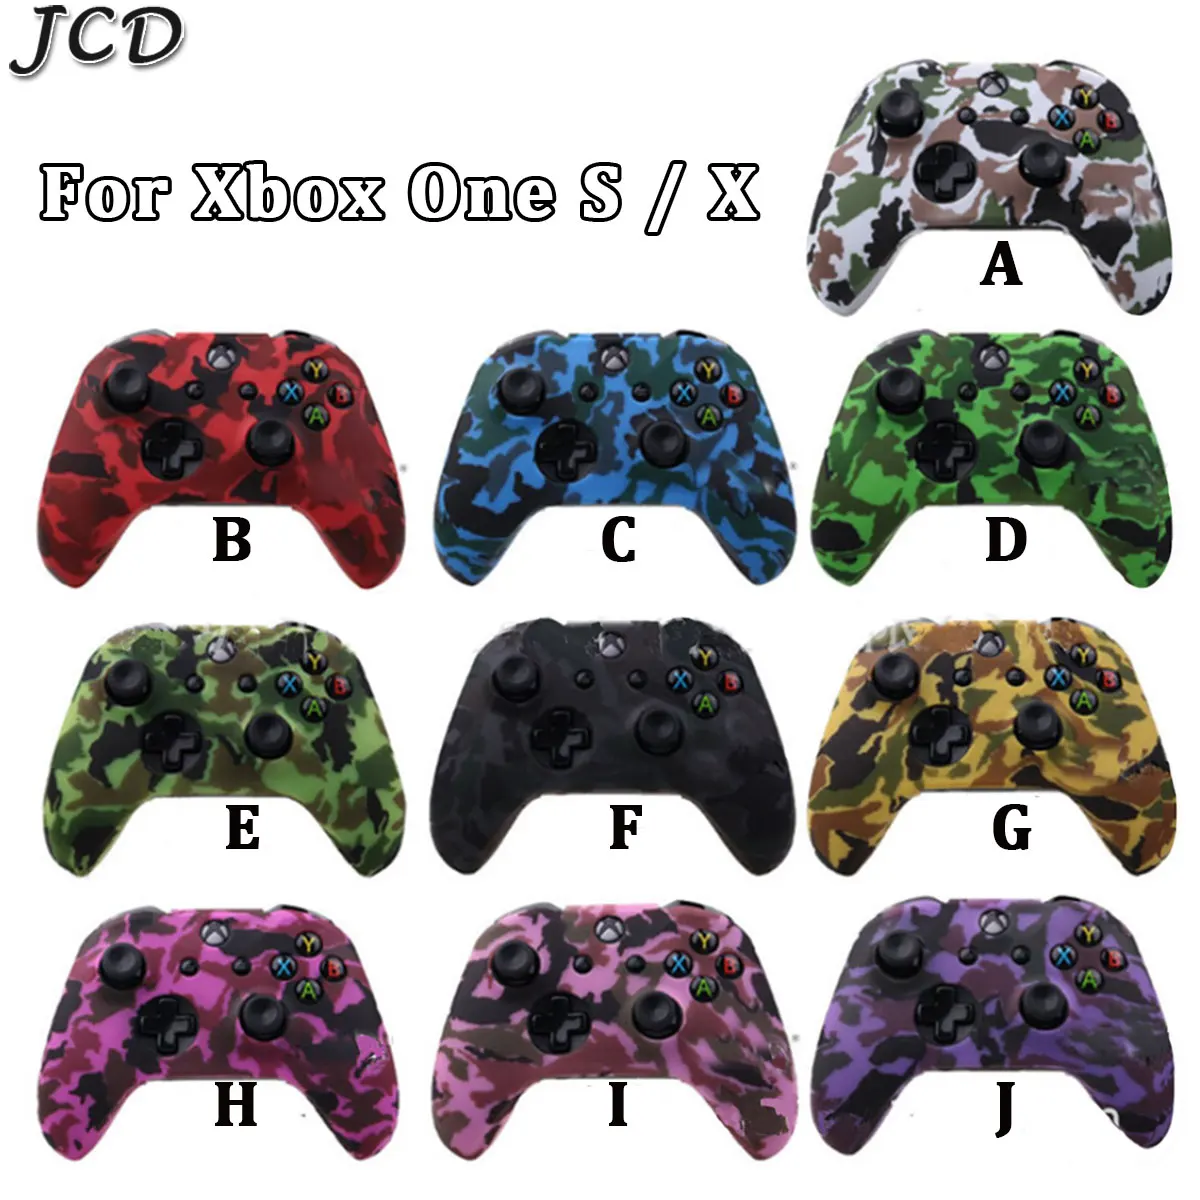 

JCD Silicone Protective Skin Case for XBox One X S Controller Protector Water Transfer Printing Camouflage Cover Grips Caps